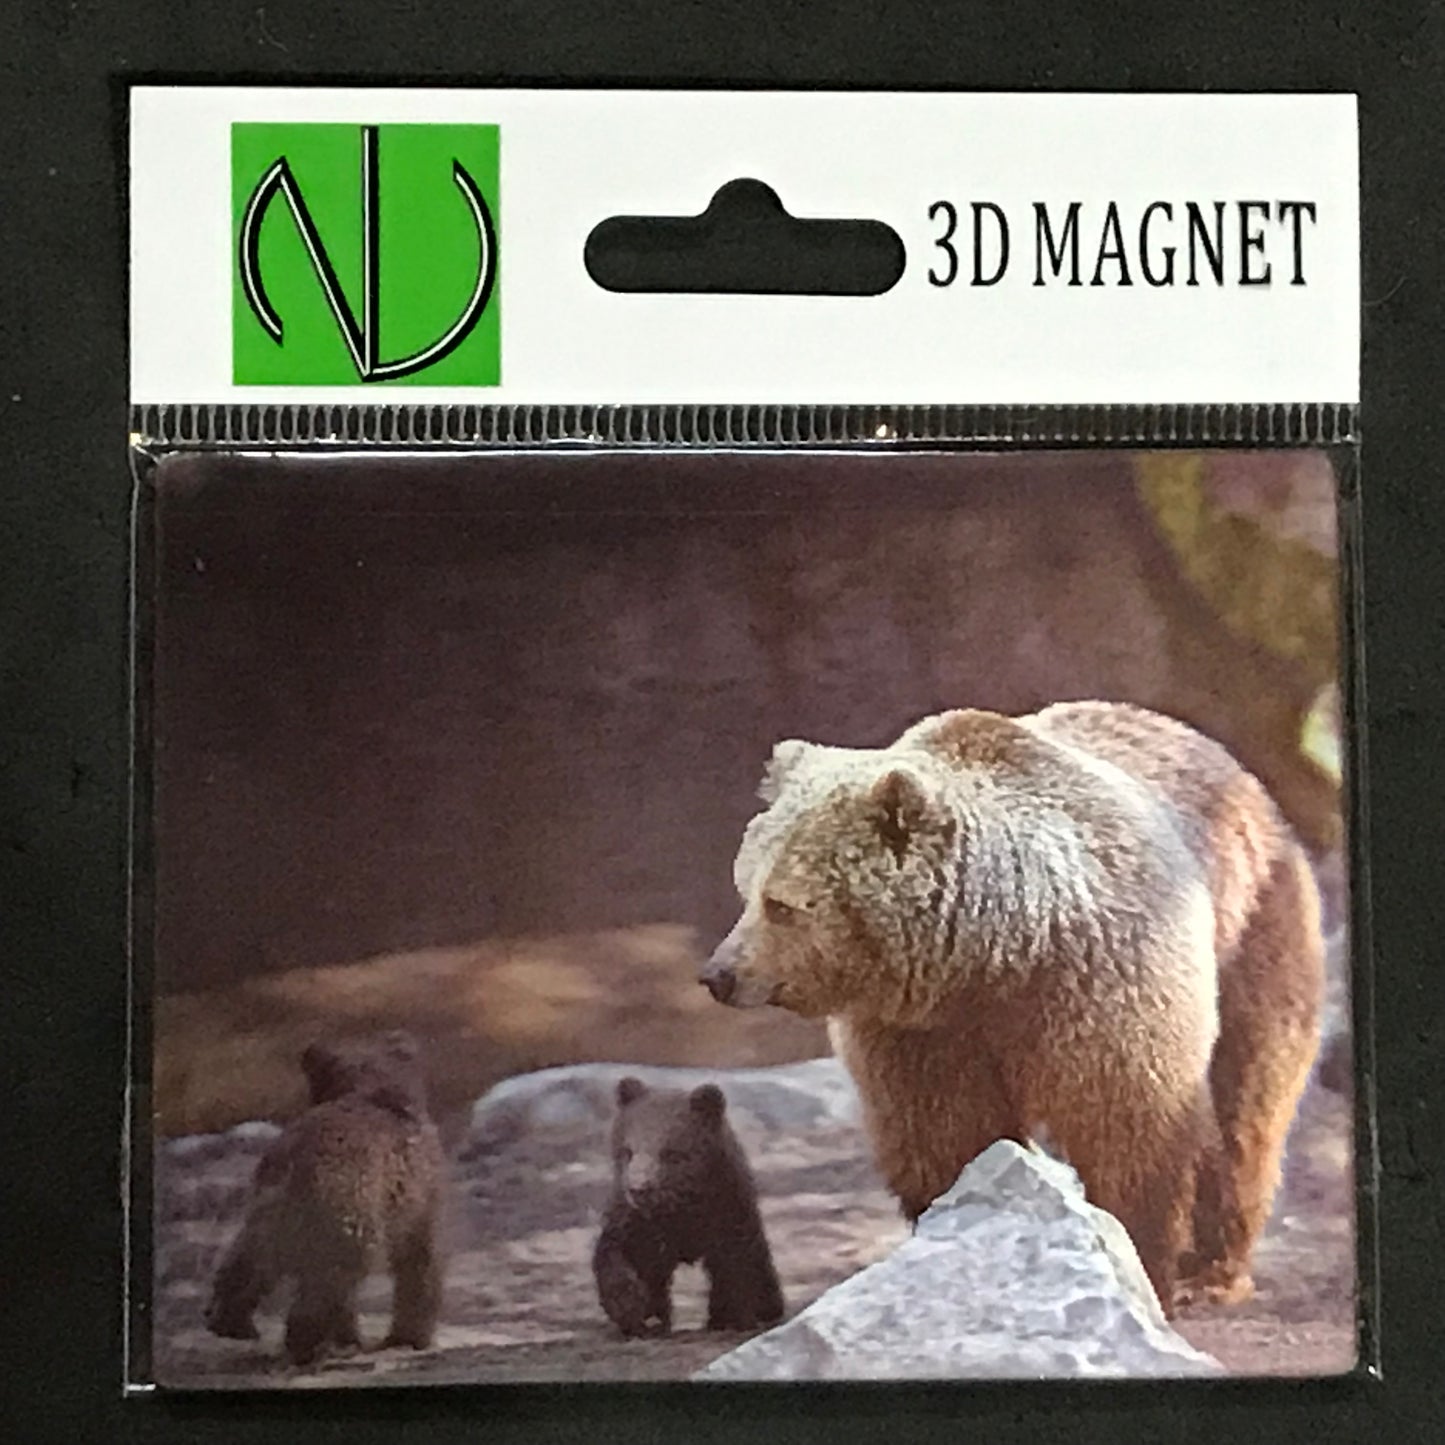 GRIZZLY BEAR SOW & CUBS 3D LENTICULAR MAGNET 2.75" X 3.5"